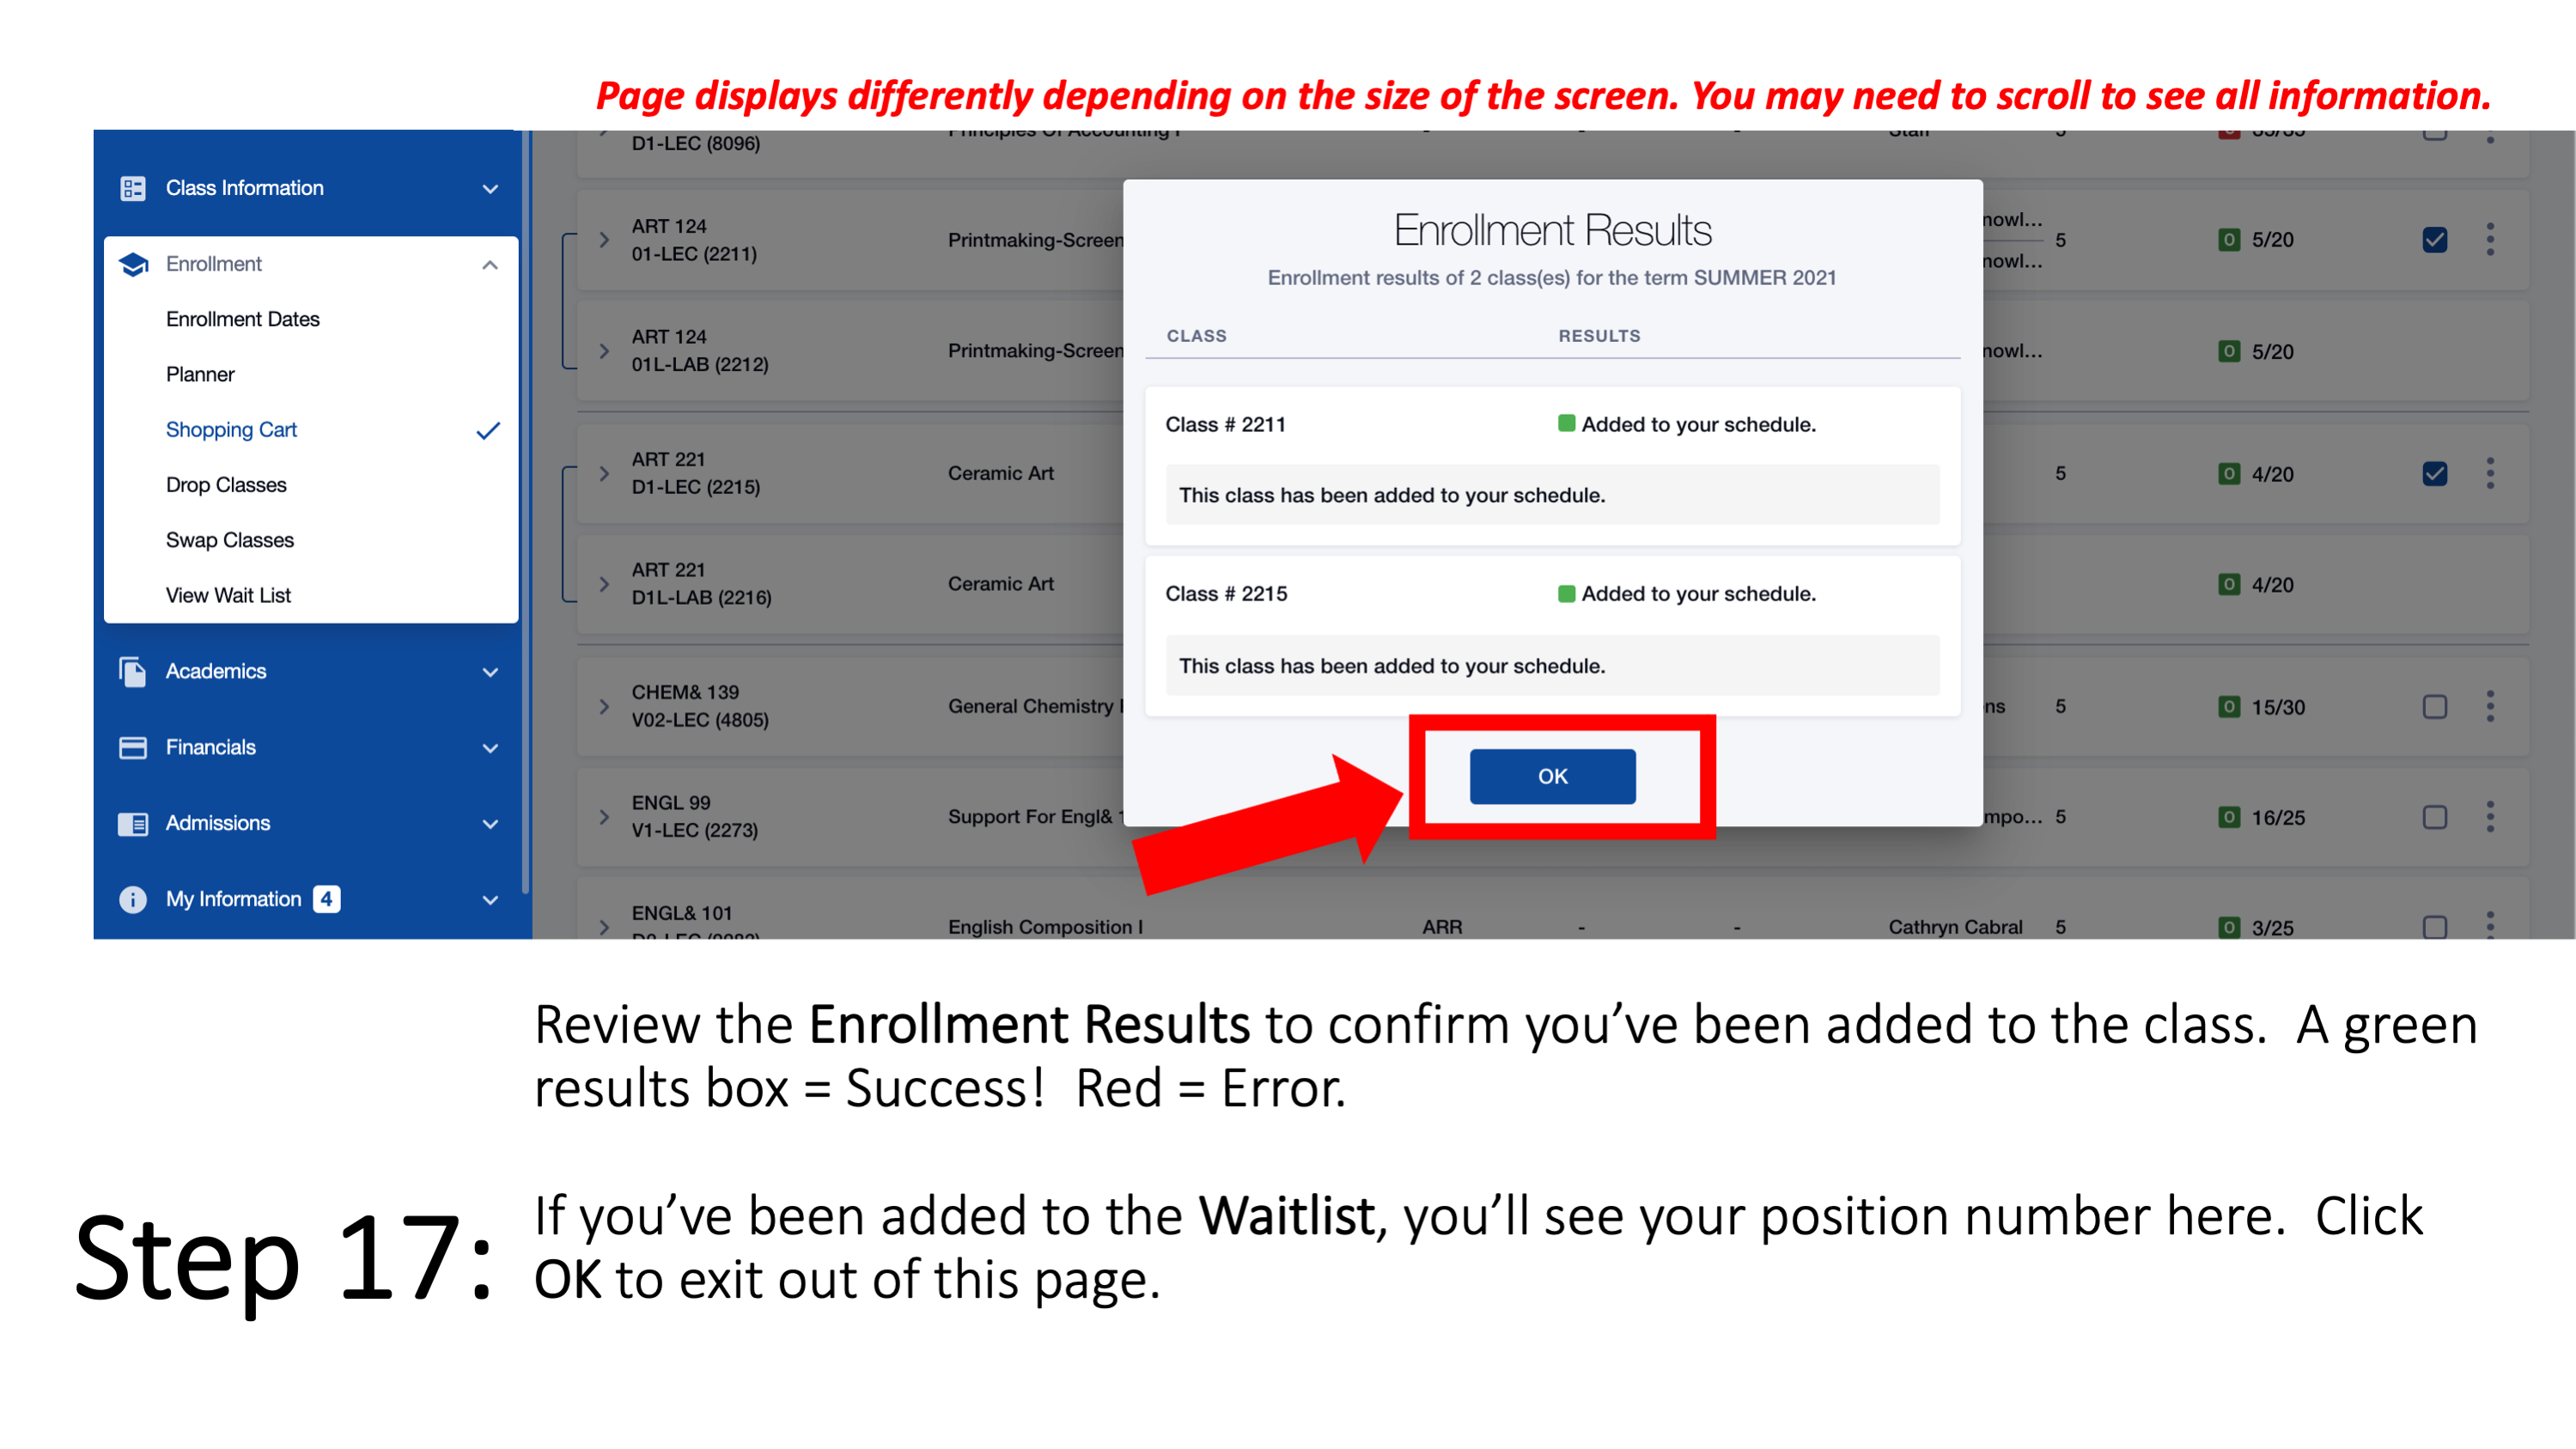 Step 17: Review the Enrollment Results to confirm you’ve been added to the class.  A green results box = Success!  Red = Error. If you’ve been added to the Waitlist, you’ll see your position number here.  Click OK to exit out of this page. Page displays differently depending on the size of the screen. You may need to scroll to see all information.